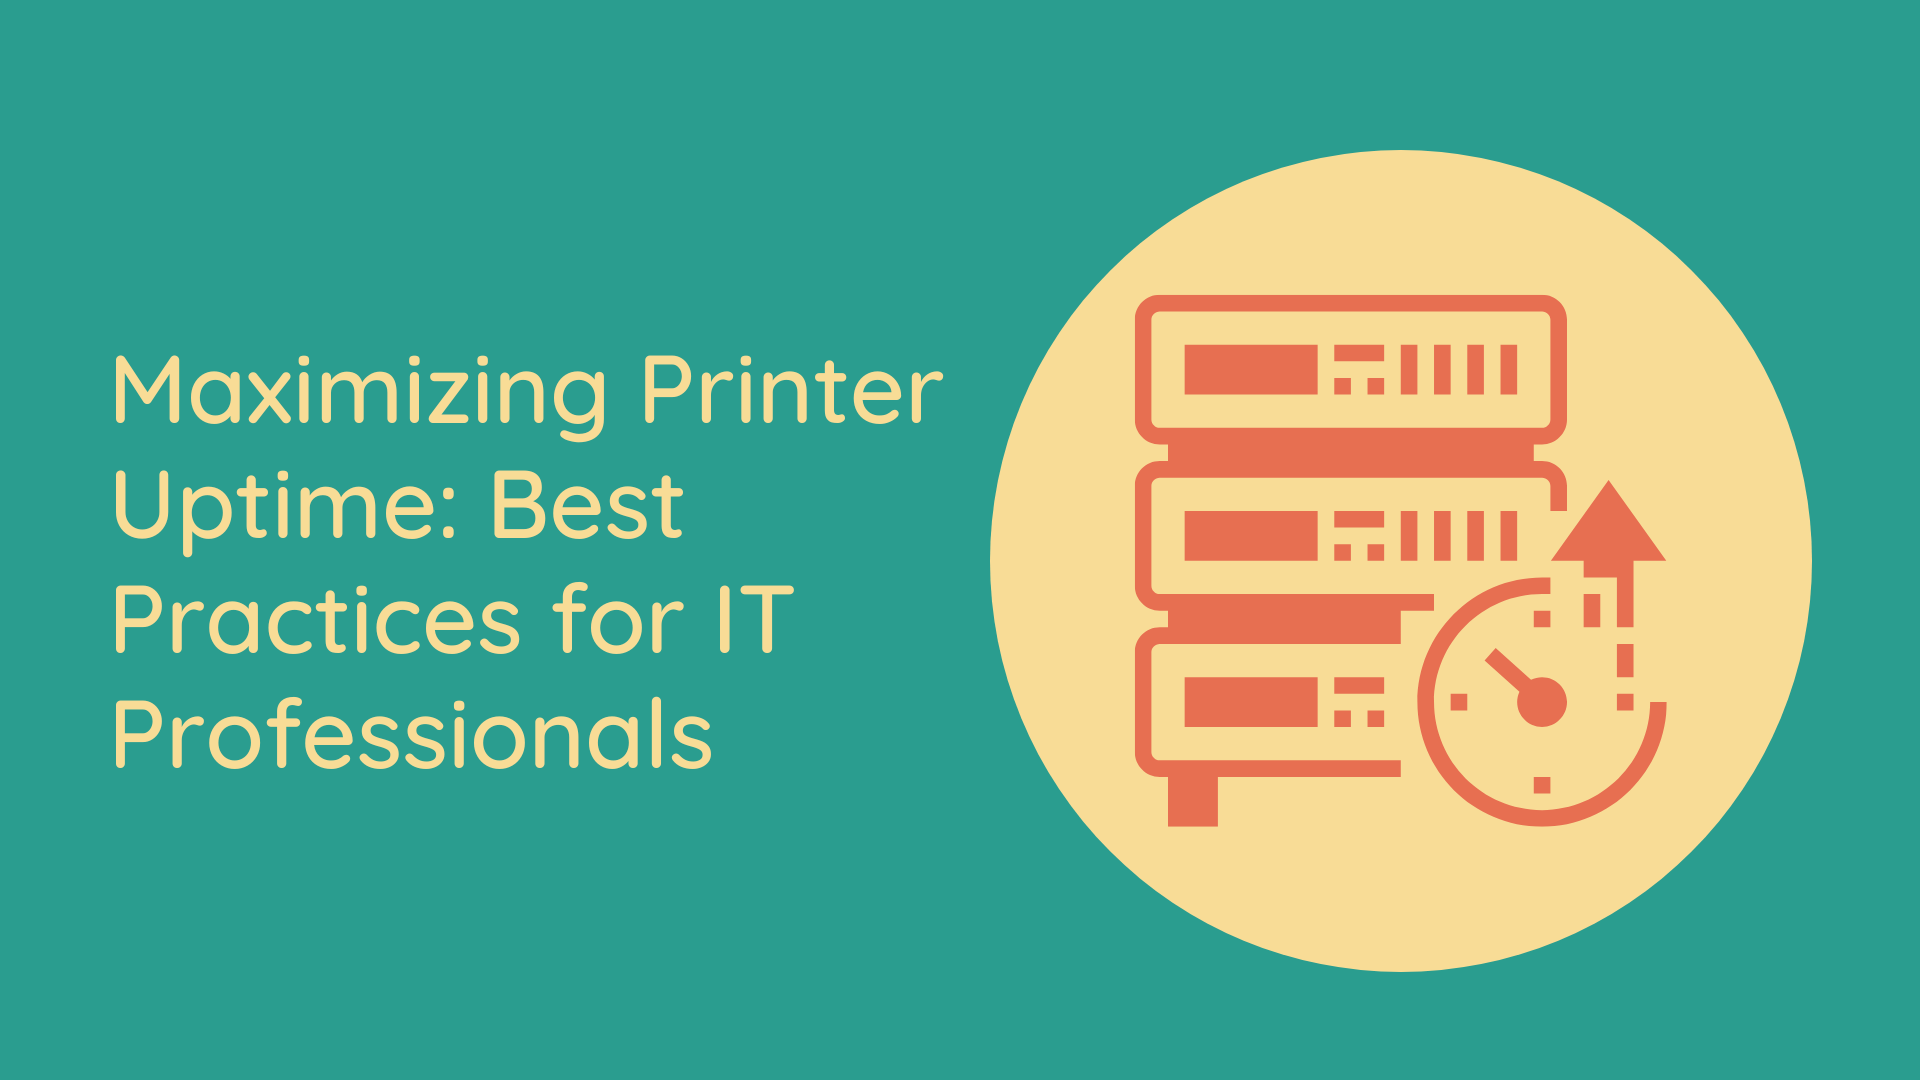 Maximizing Printer Uptime: Best Practices for IT Professionals